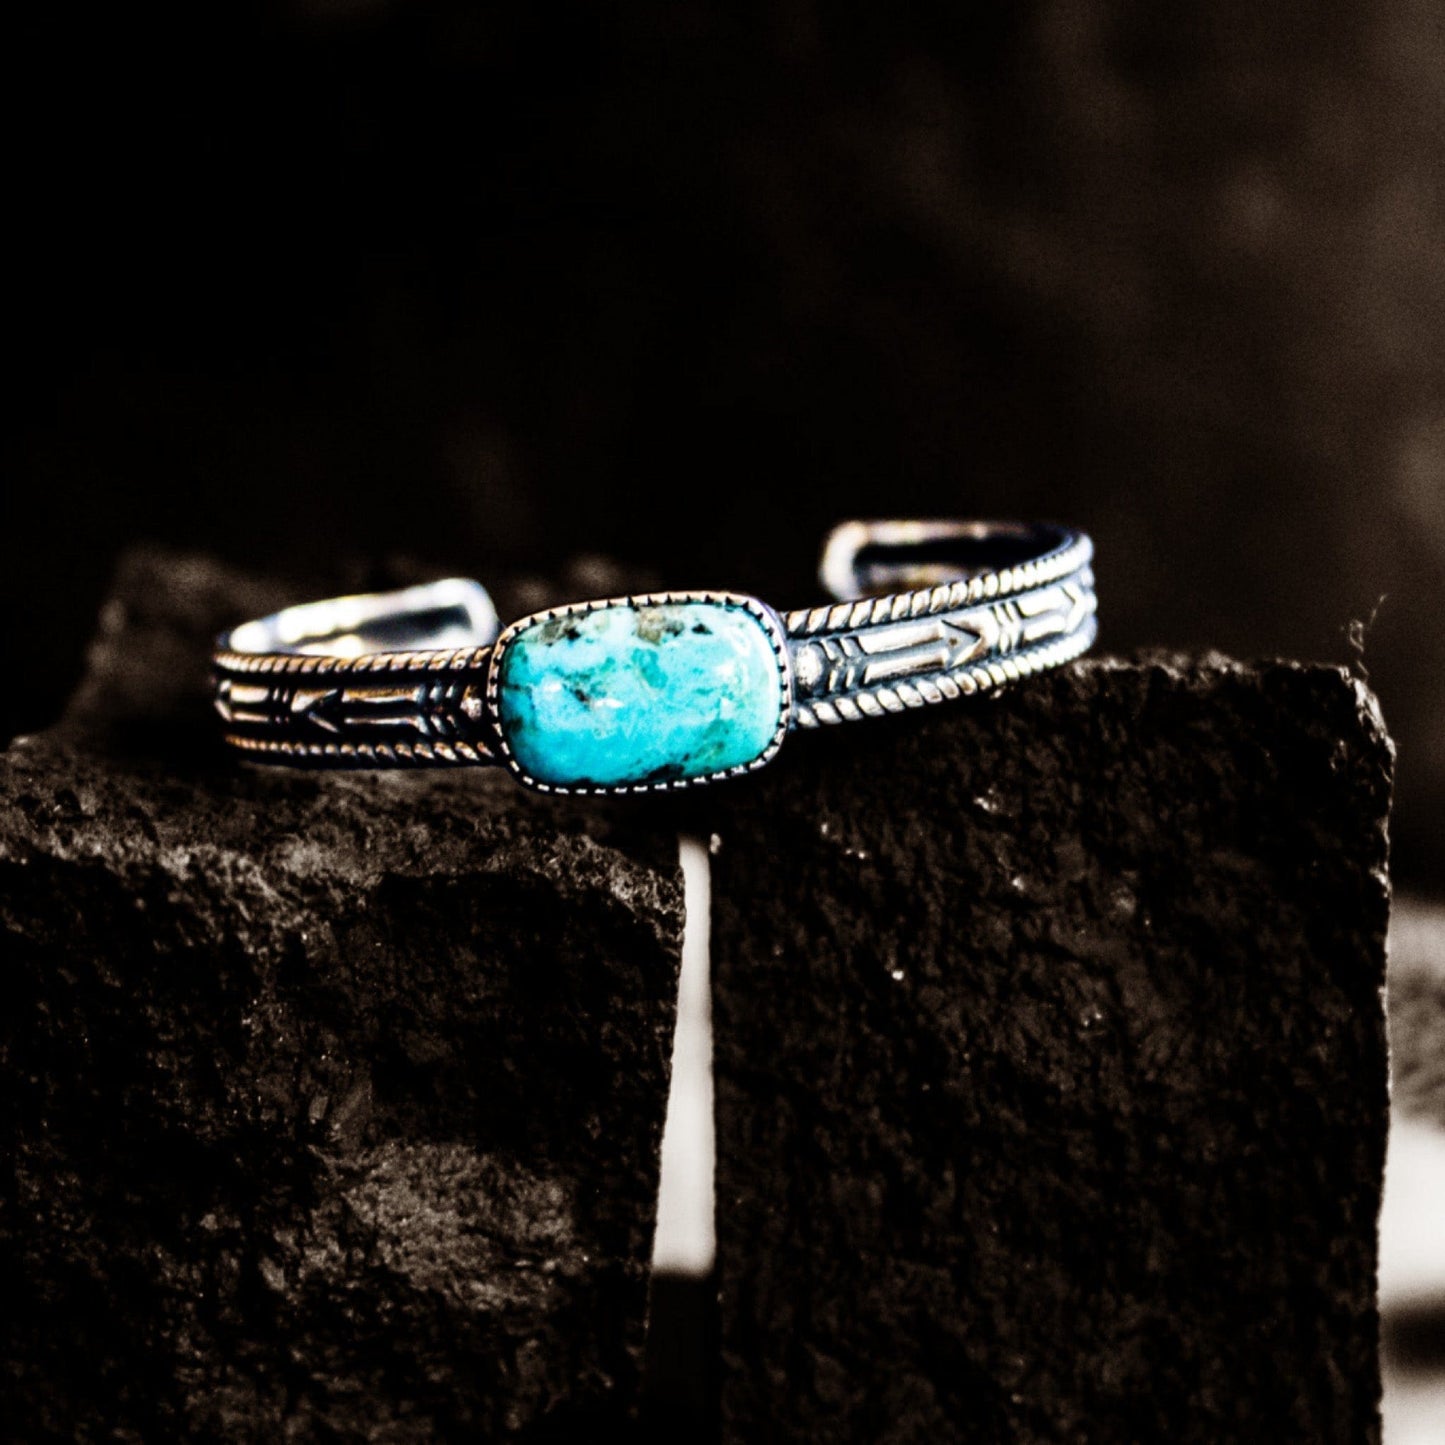 Follow Your Arrow Turquoise Cuff